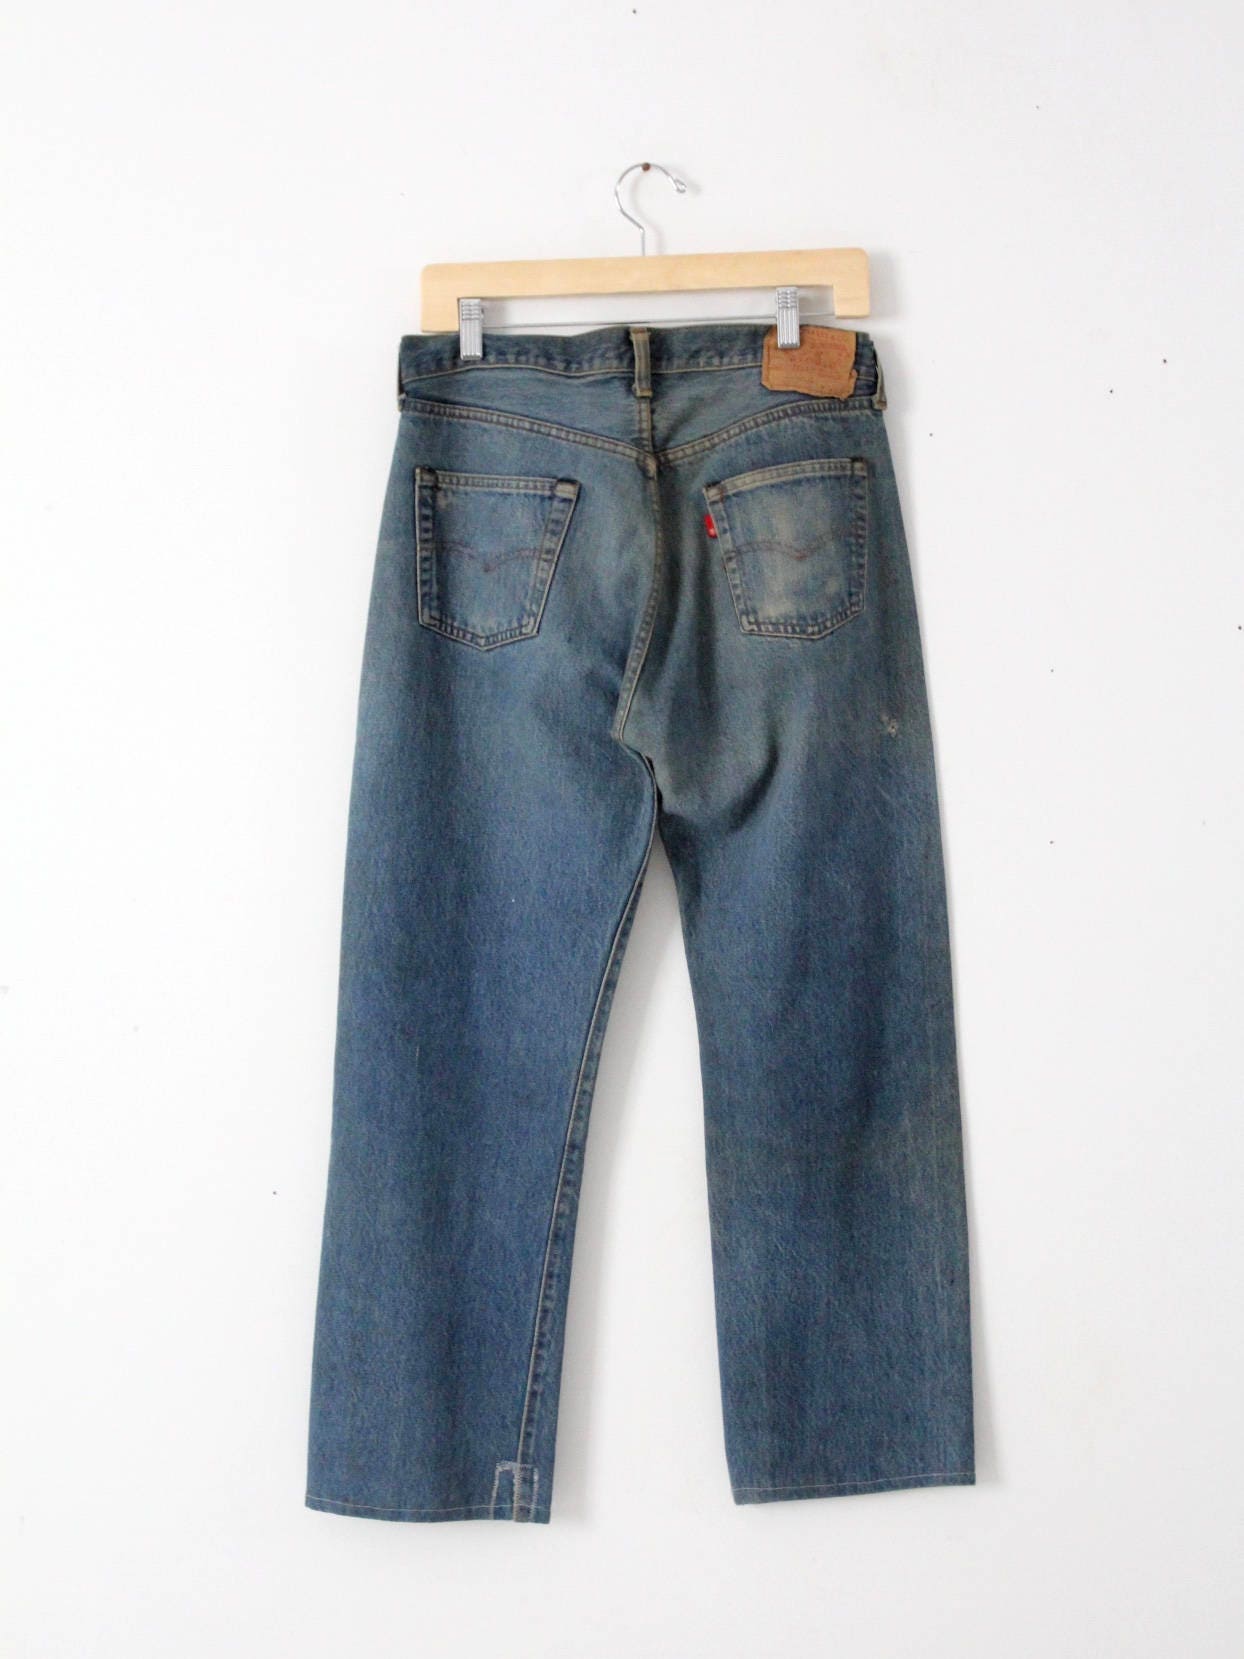 1970s Red Line 501 Levi's Jeans, Waist 32 - Etsy